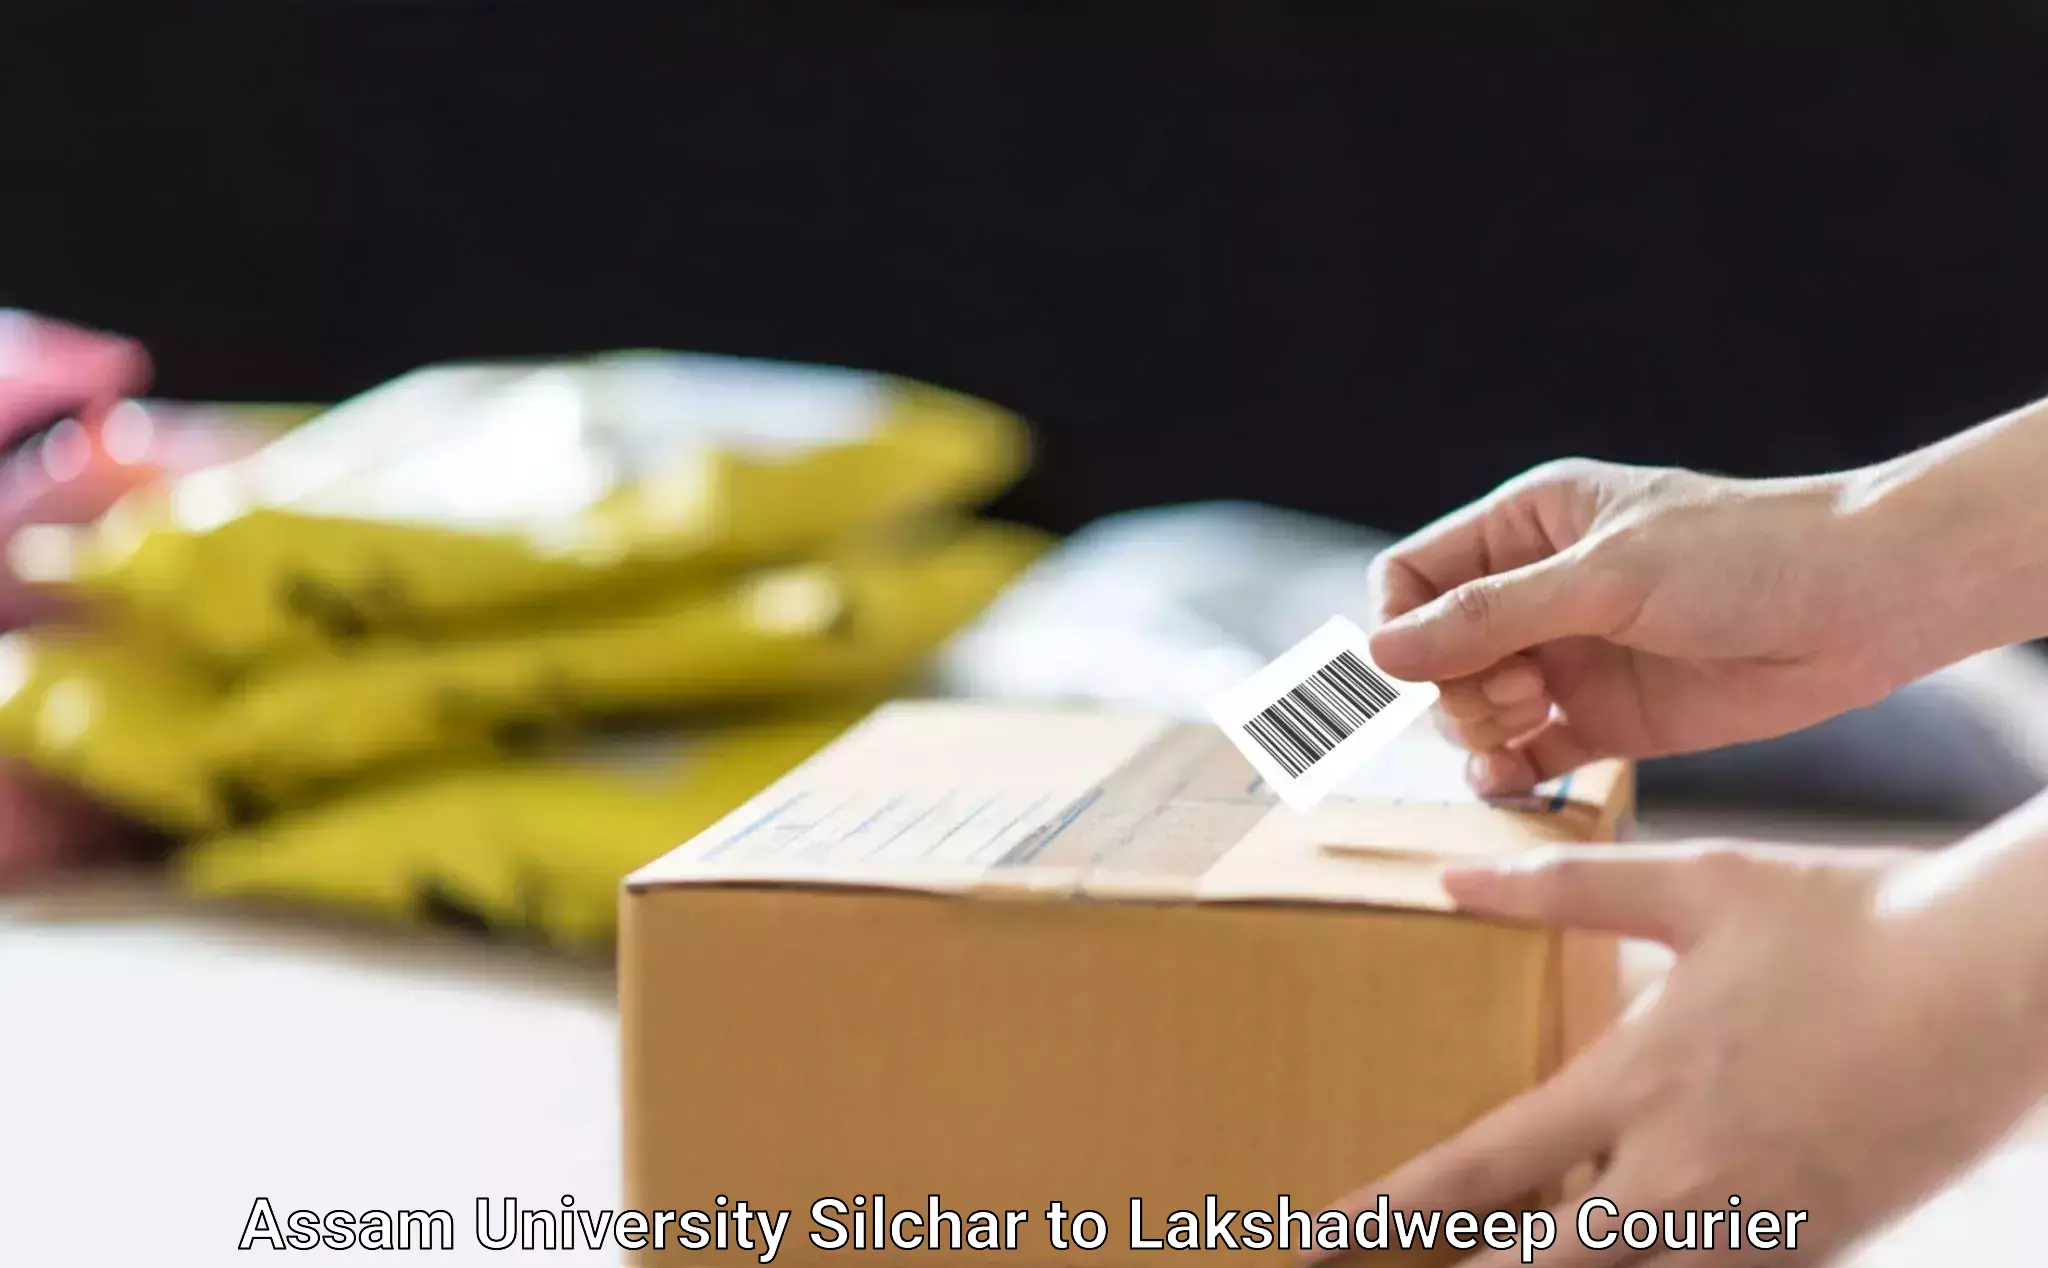 24-hour delivery options Assam University Silchar to Lakshadweep